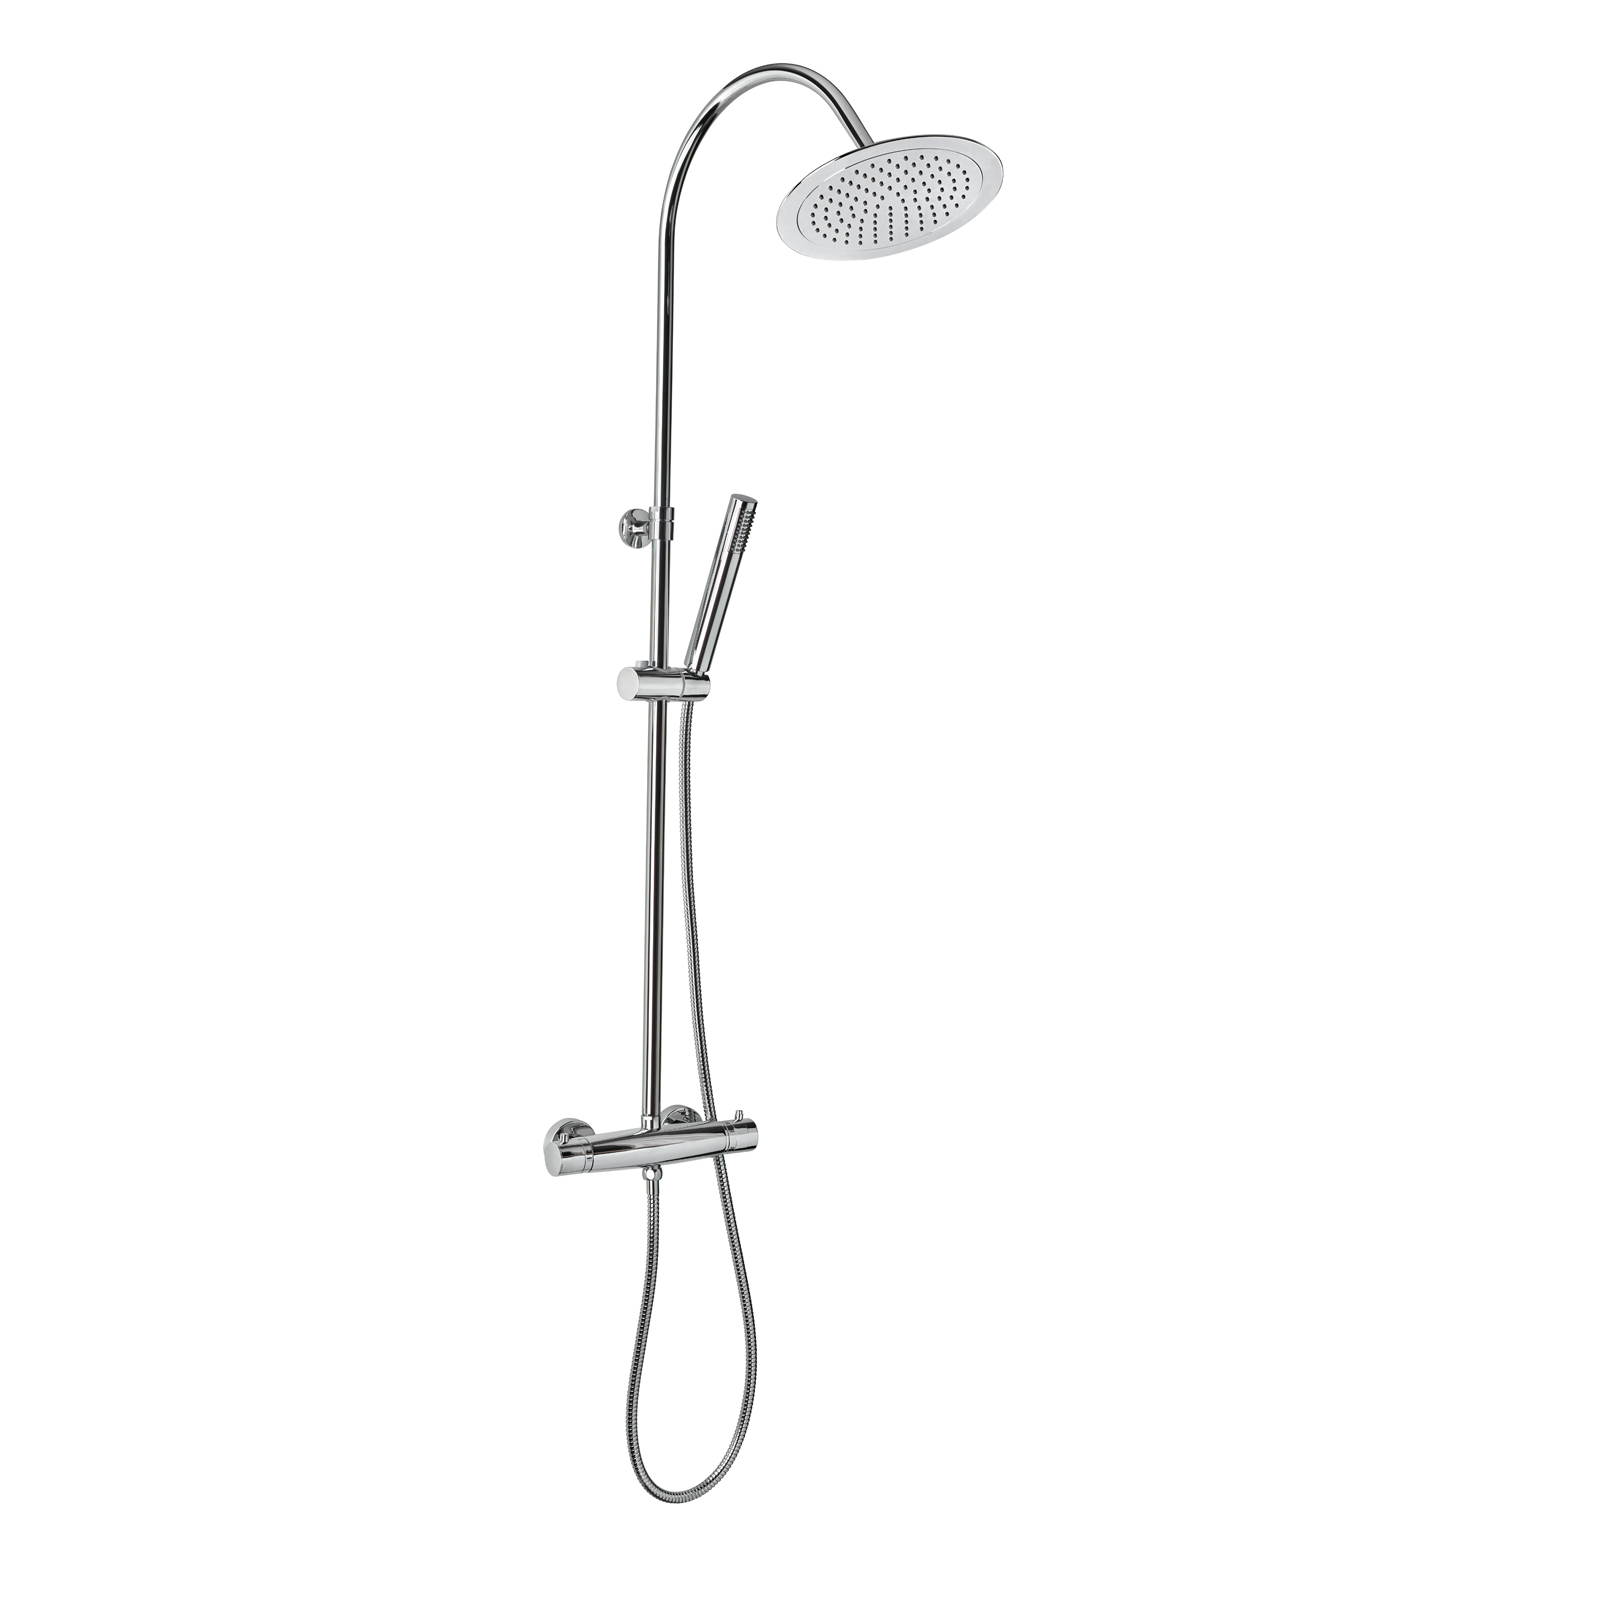 Thermostatic telescopic shower column with automatic diverter, shower rose and self cleaning hand shower